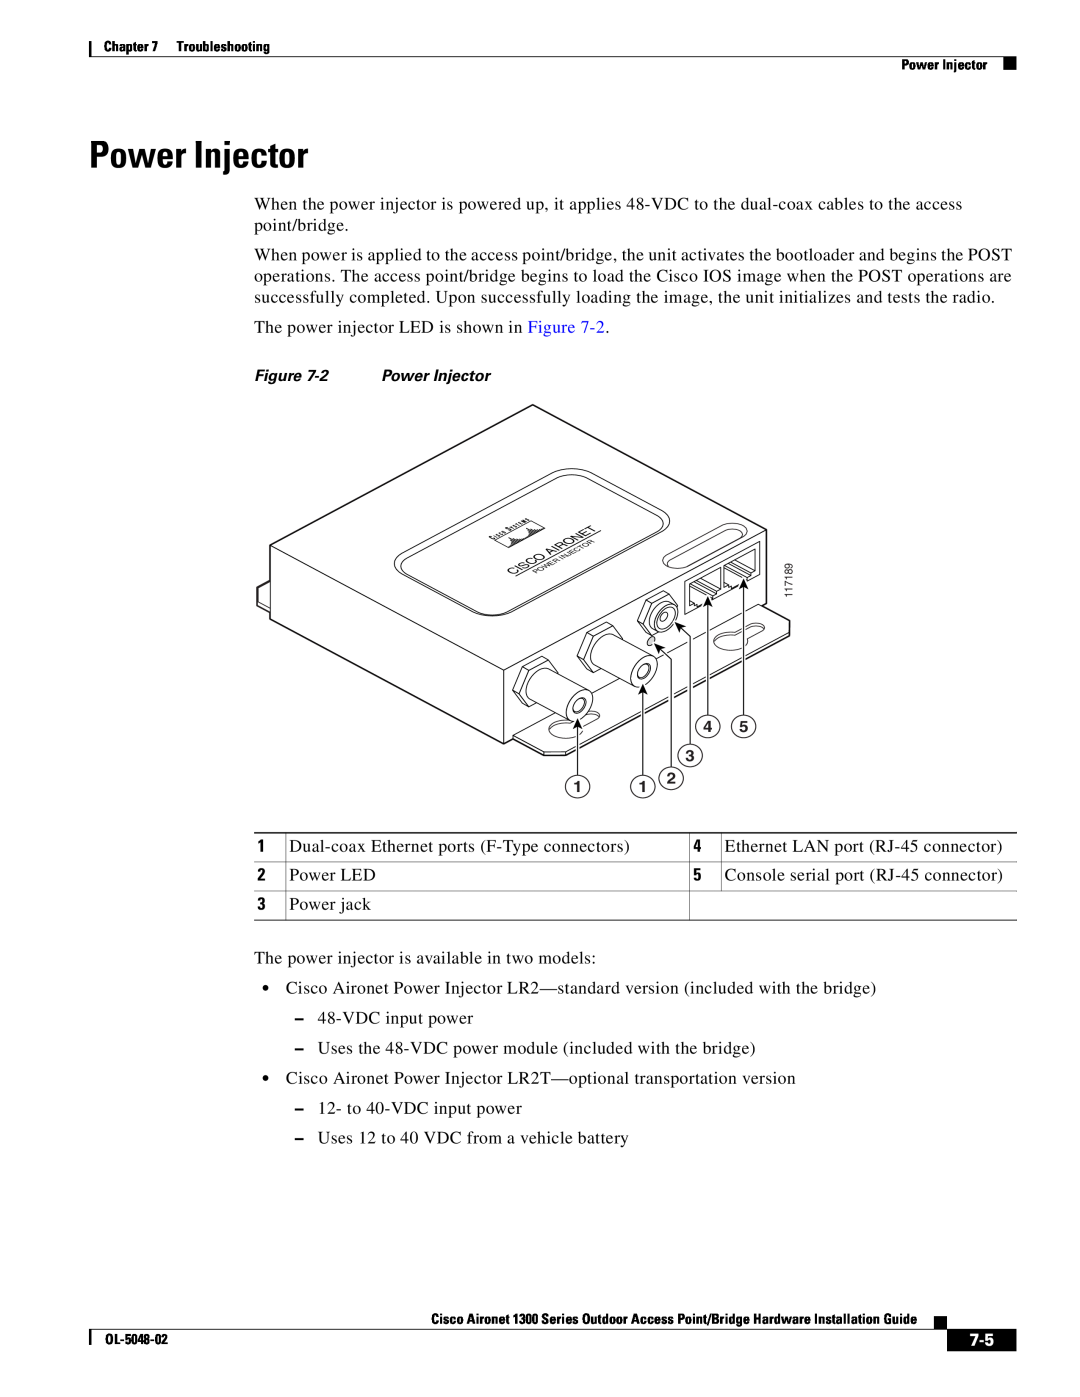 Cisco Systems 1300 Series manual Power Injector 